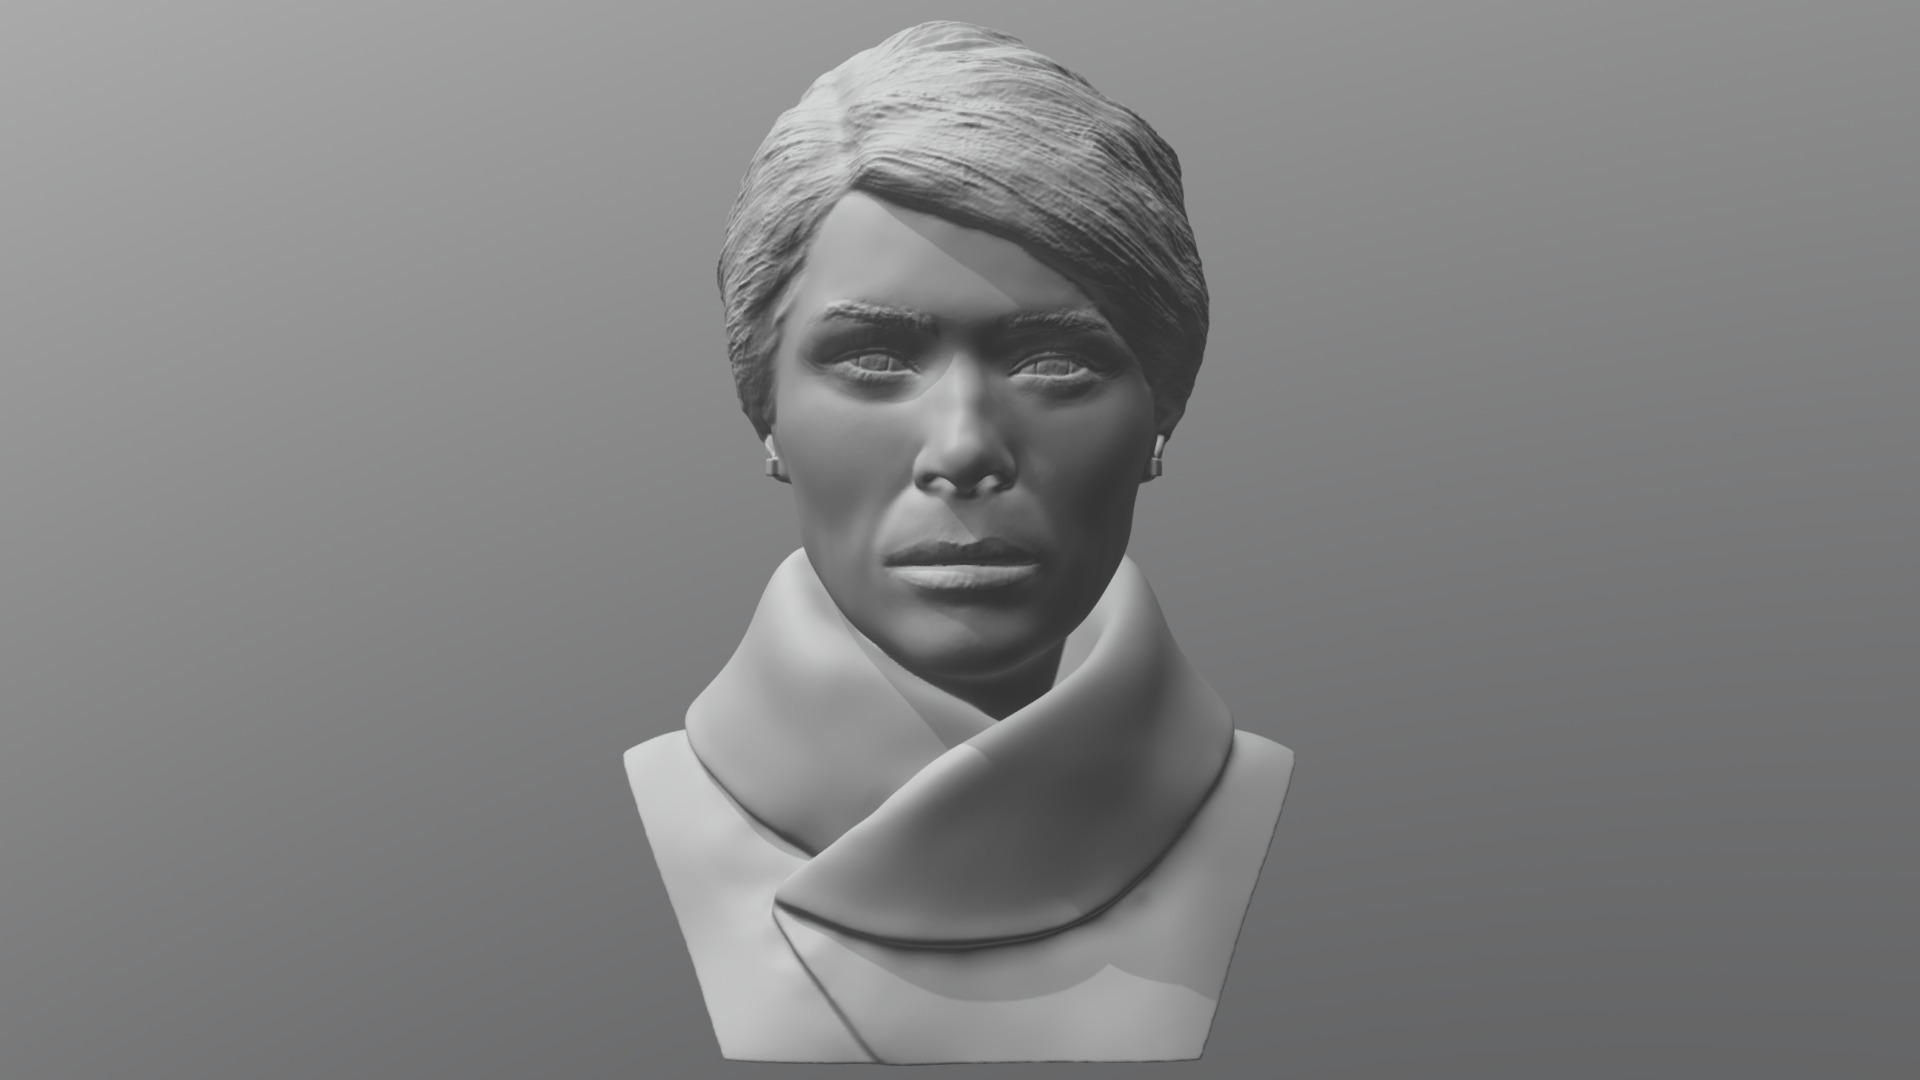 3D model Melania Trump bust for 3D printing - This is a 3D model of the Melania Trump bust for 3D printing. The 3D model is about a person with a white shirt.